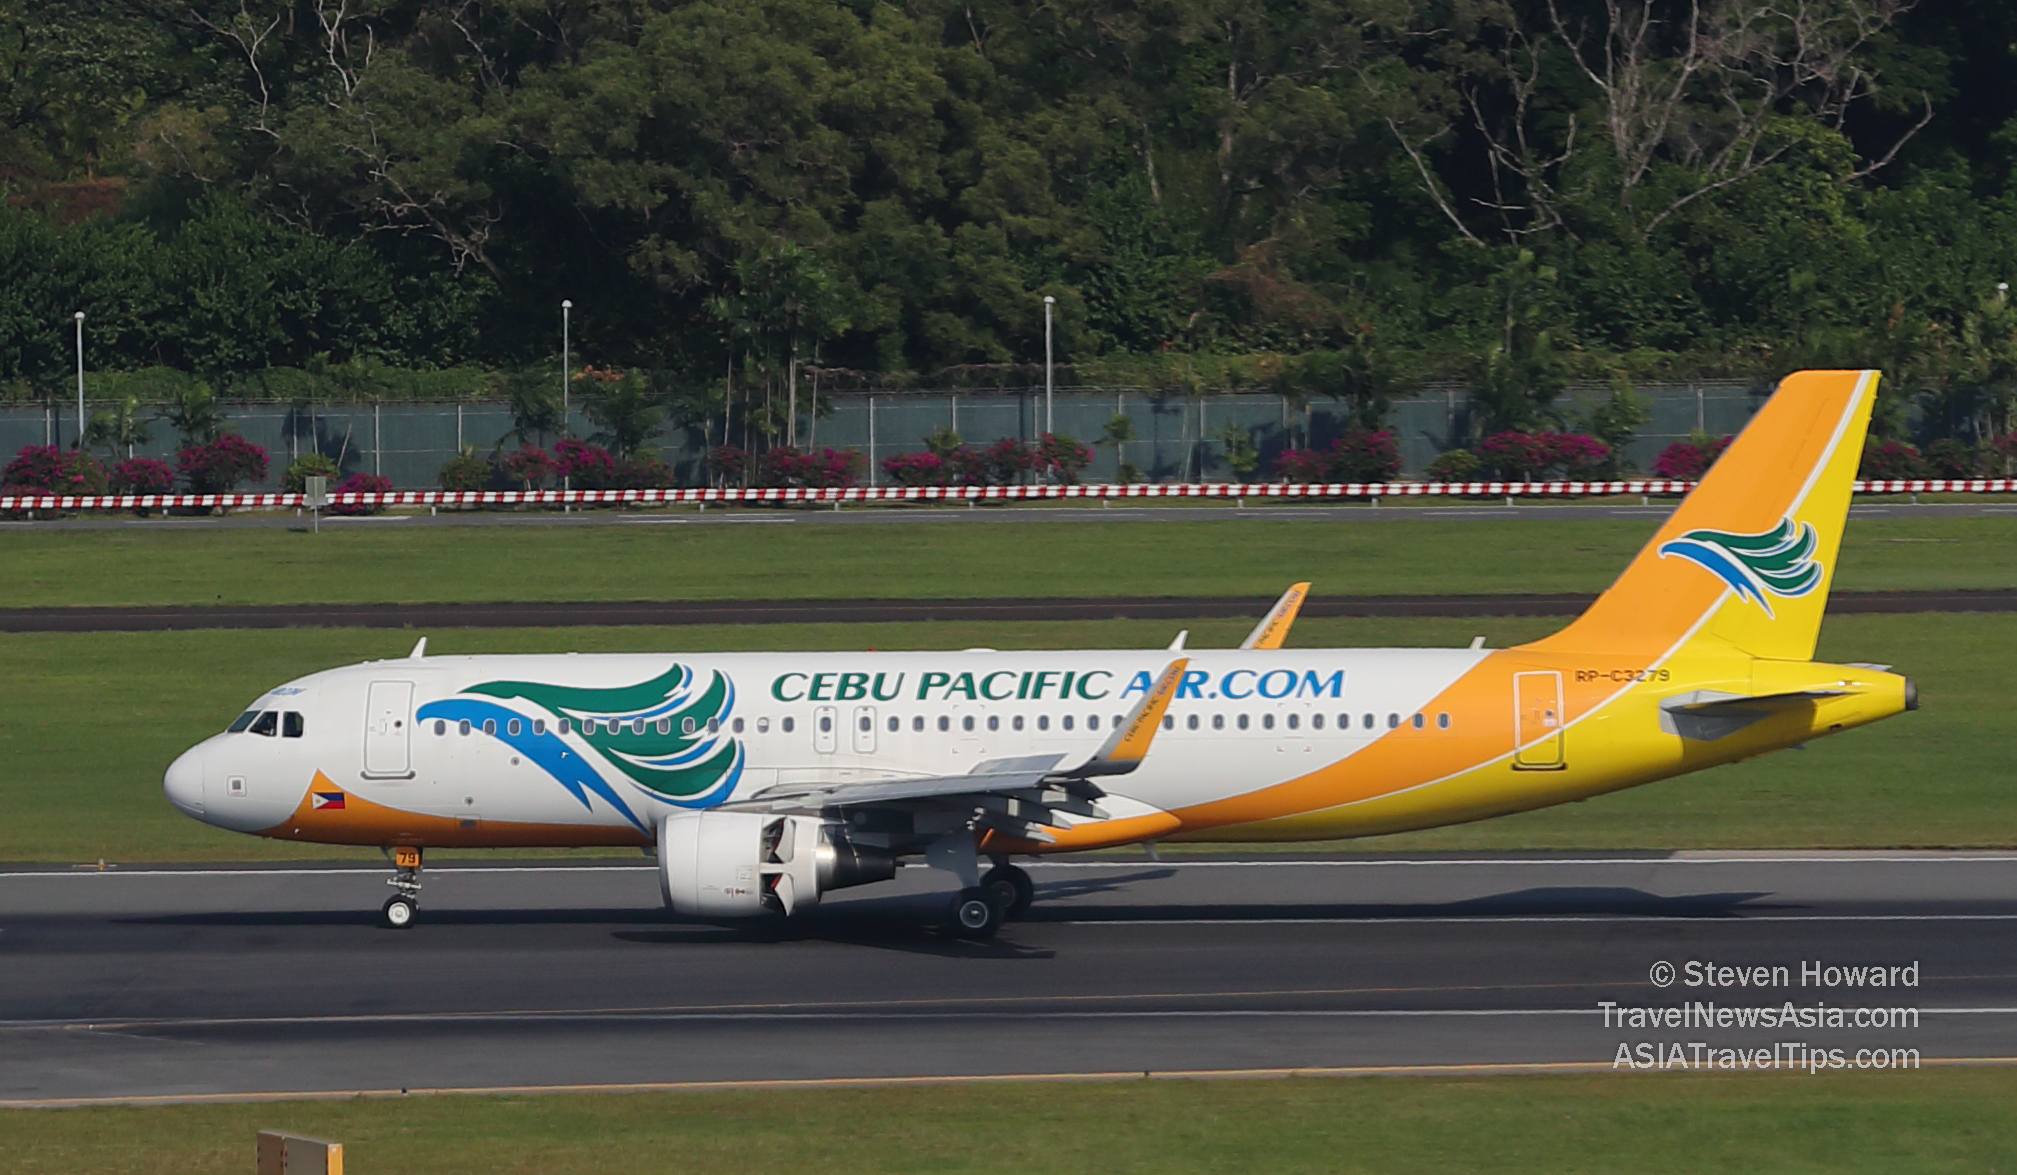 Cebu Pacific Airbus A320 reg: RP-C3279. Picture taken by Steven Howard of TravelNewsAsia.com. Click to enlarge.